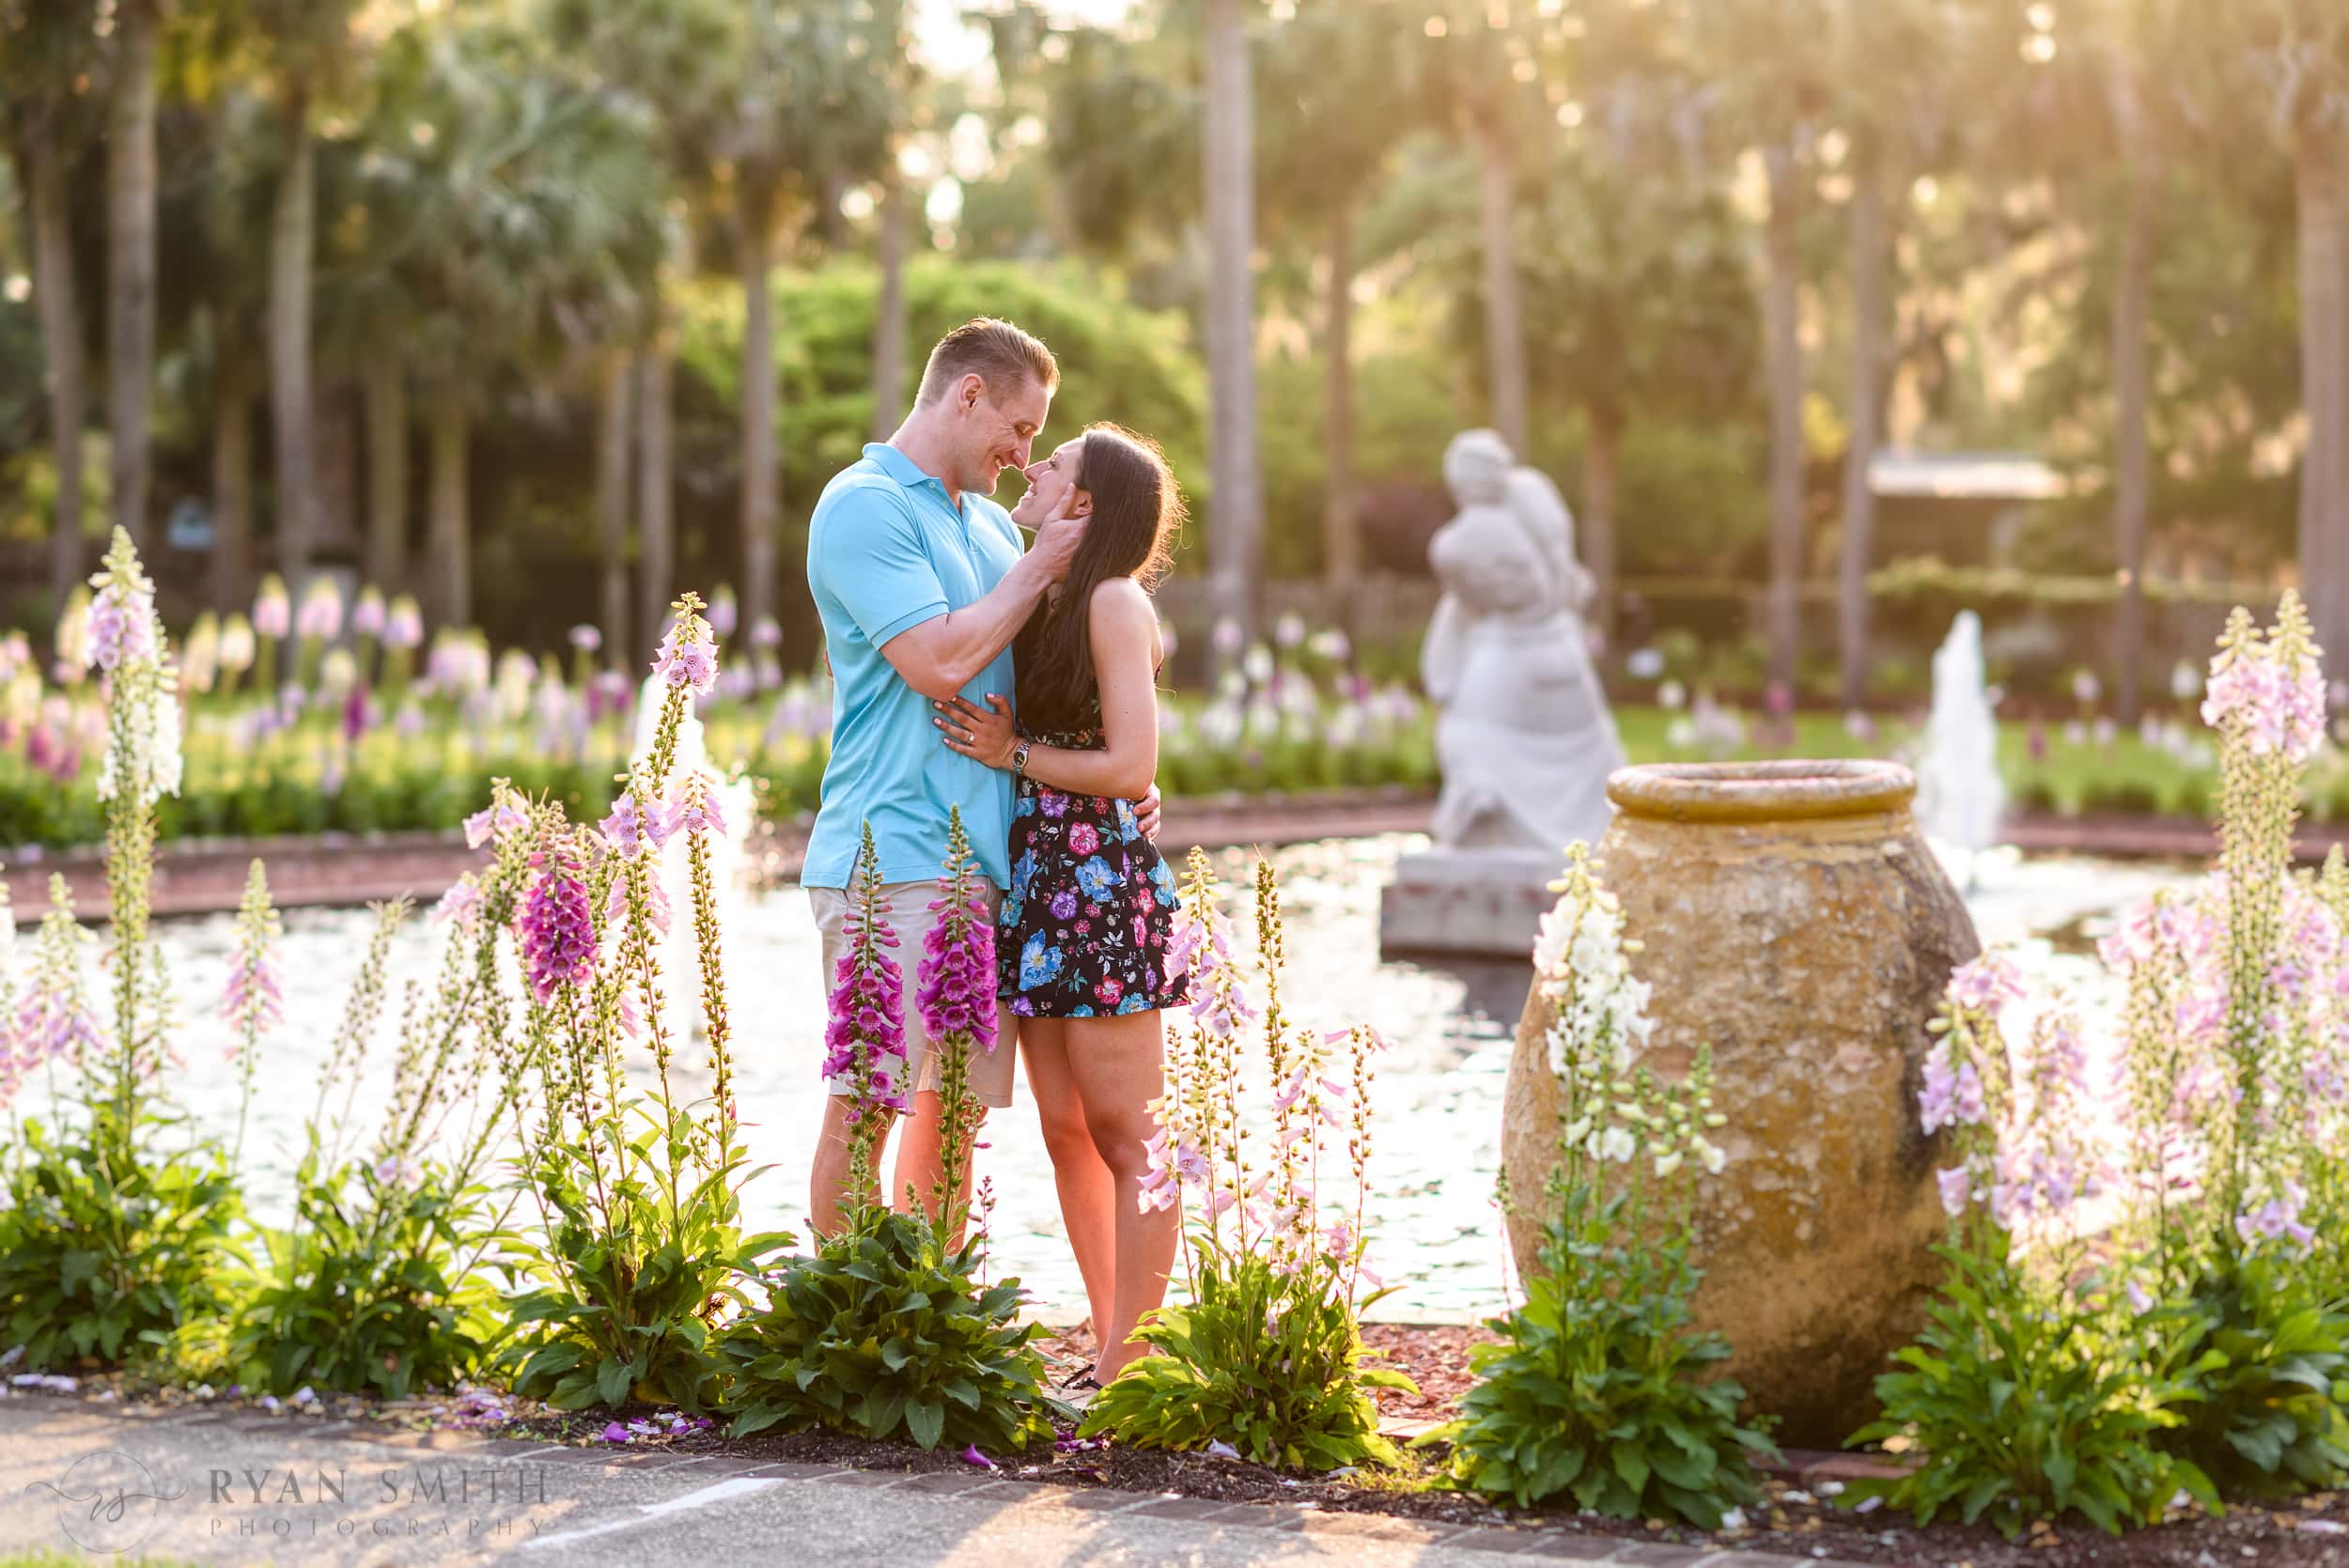 Couple smiling at each other surrounded by flowers - Brookgreen Gardens